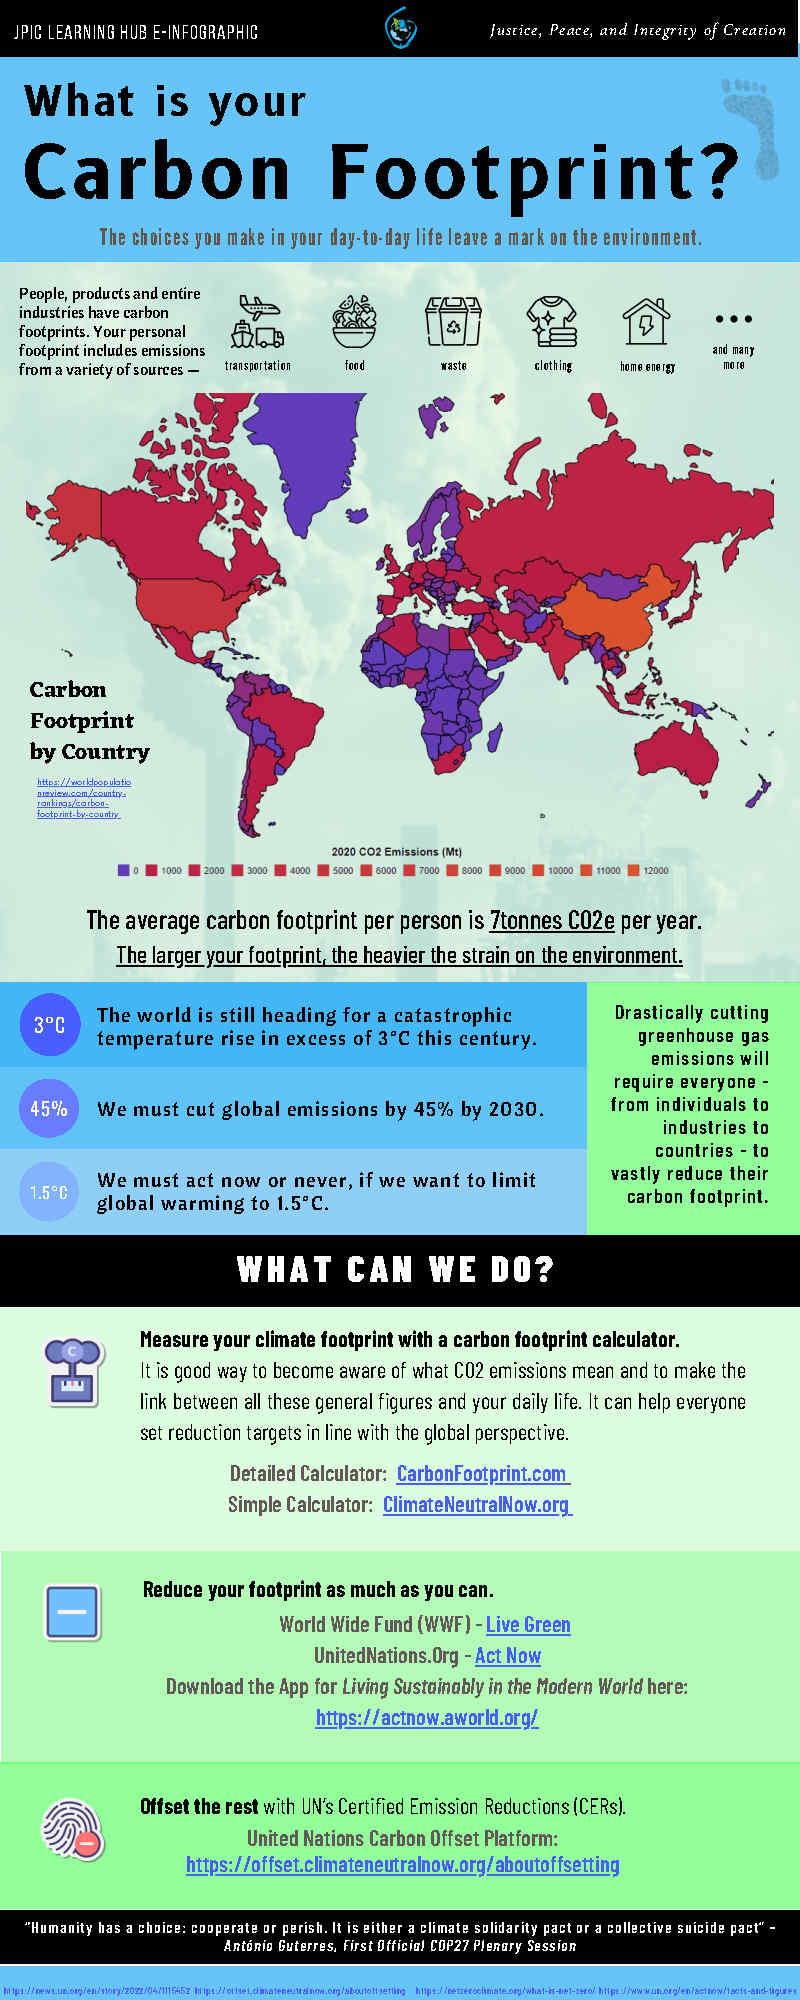 JPIC E-Infographic - What is your Carbon Footprint?